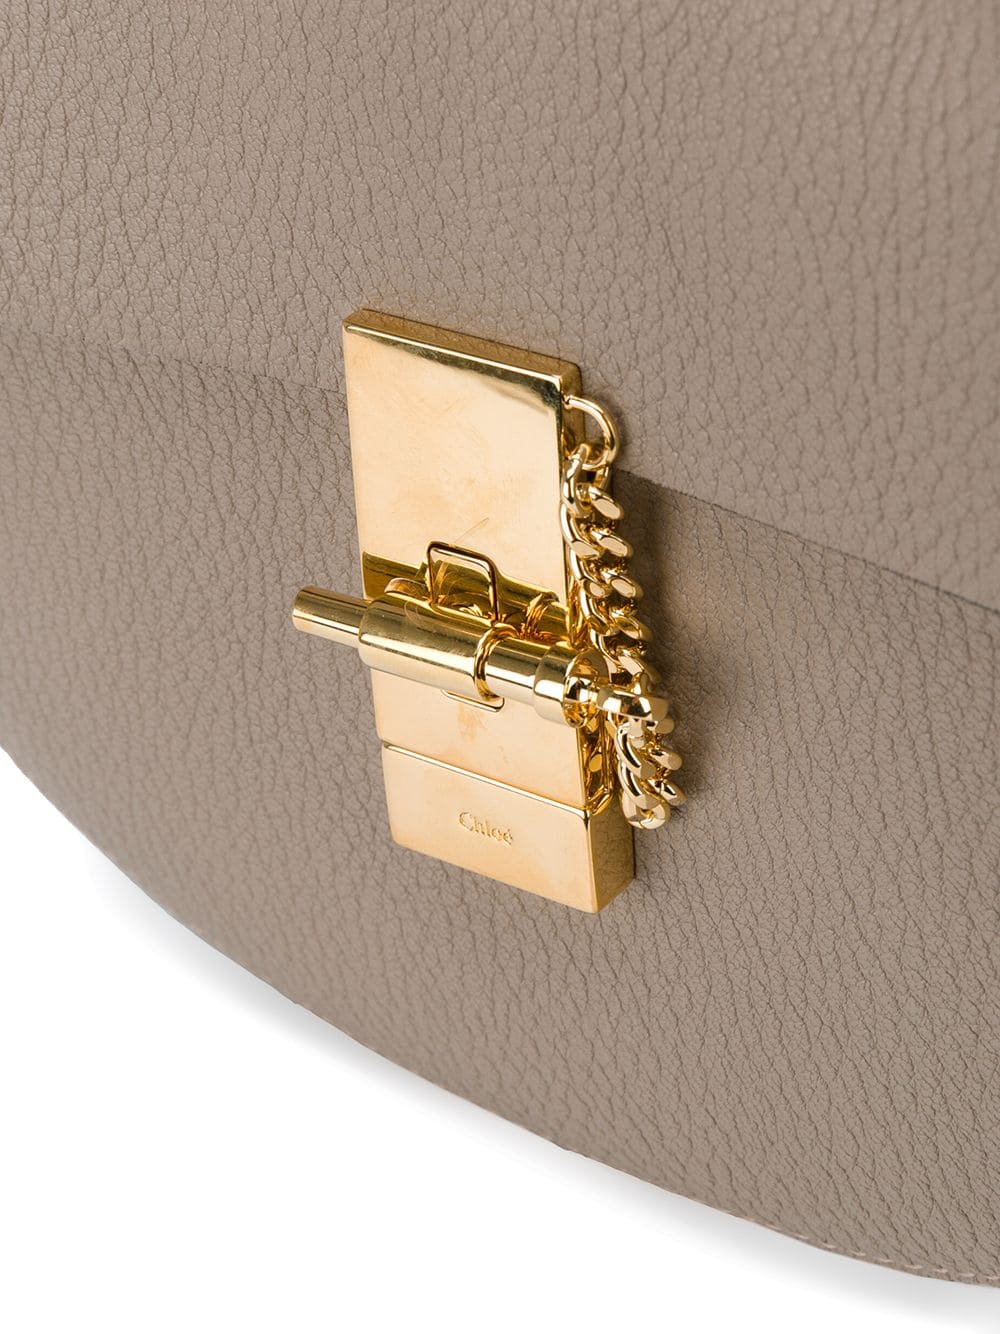 In My Bag: A Day With the Chloé Drew Bag - PurseBlog